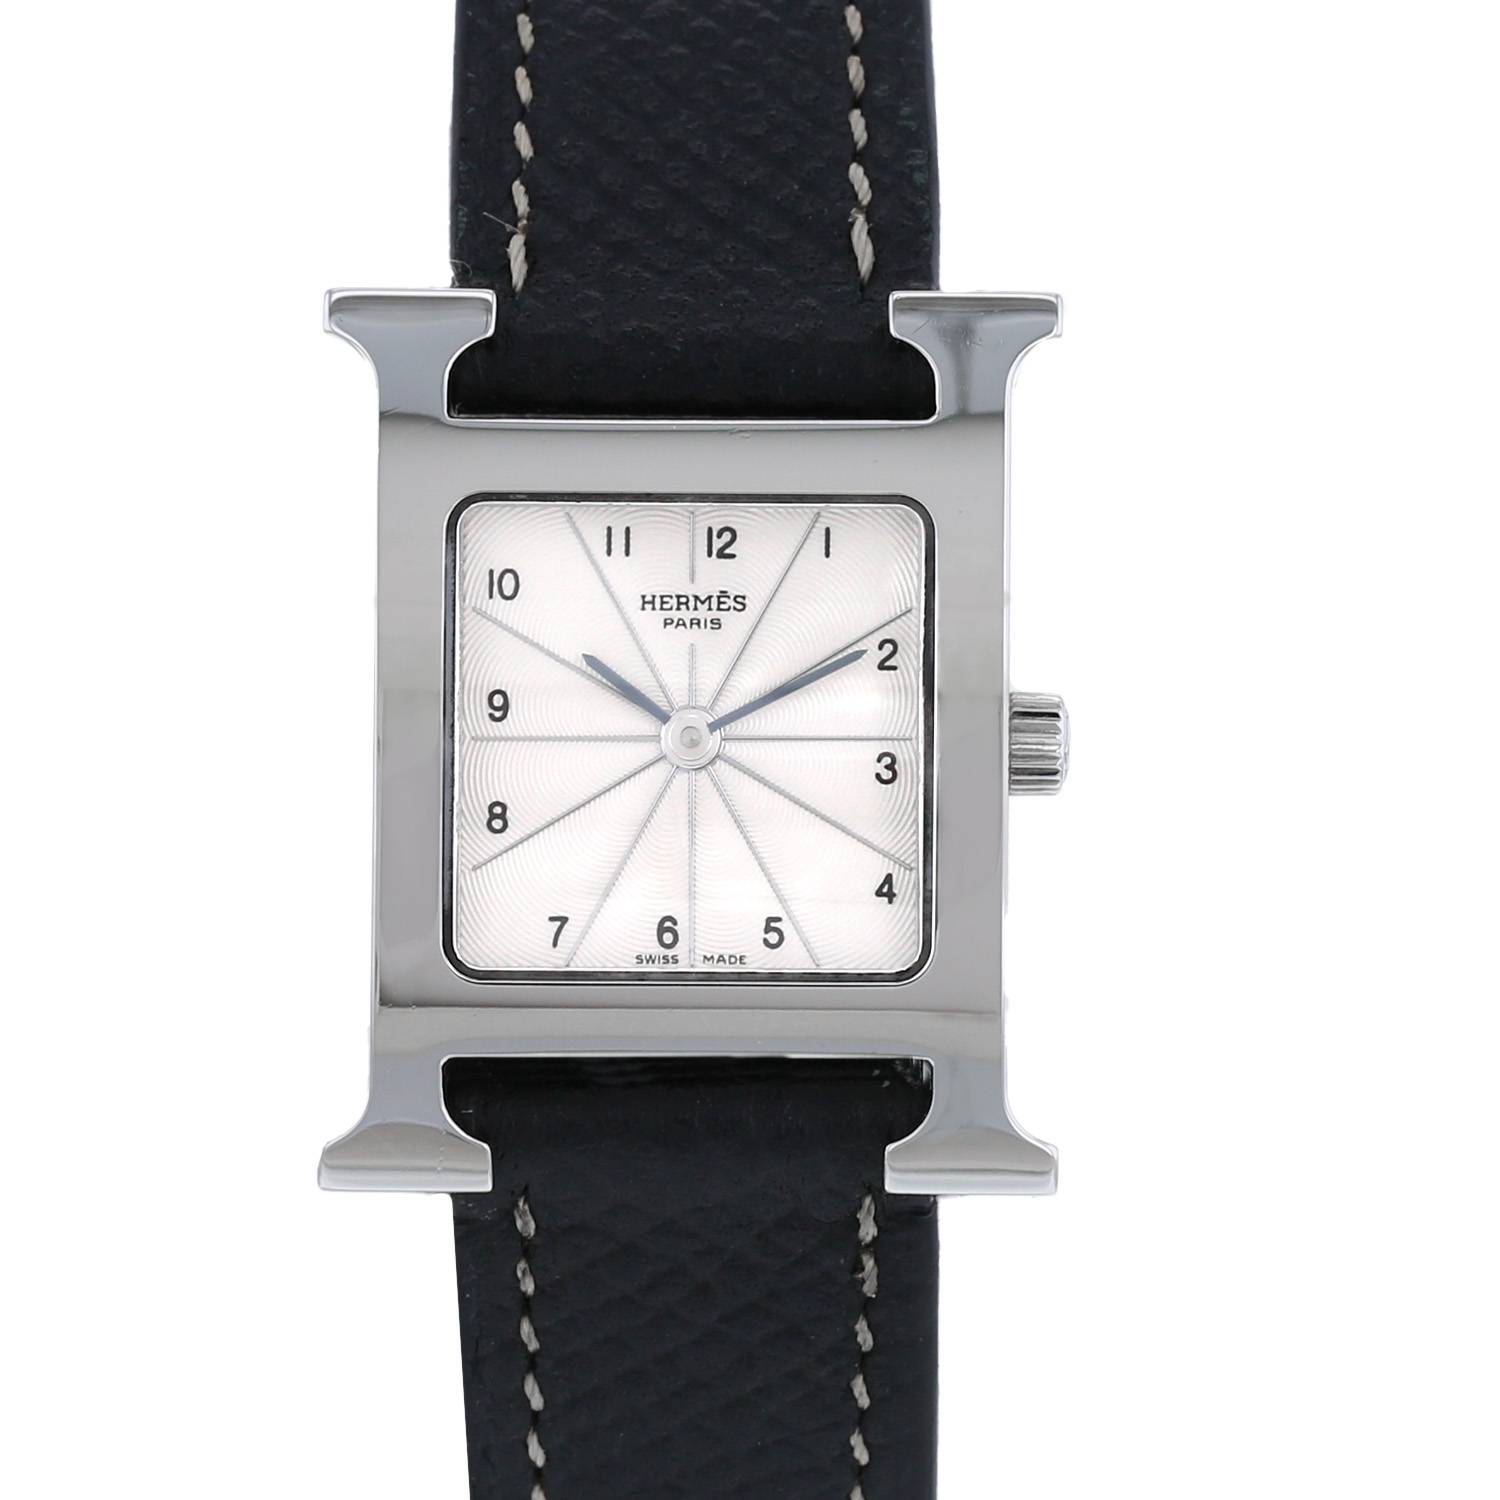 Hermès Heure H Watch 403668 | Collector Square